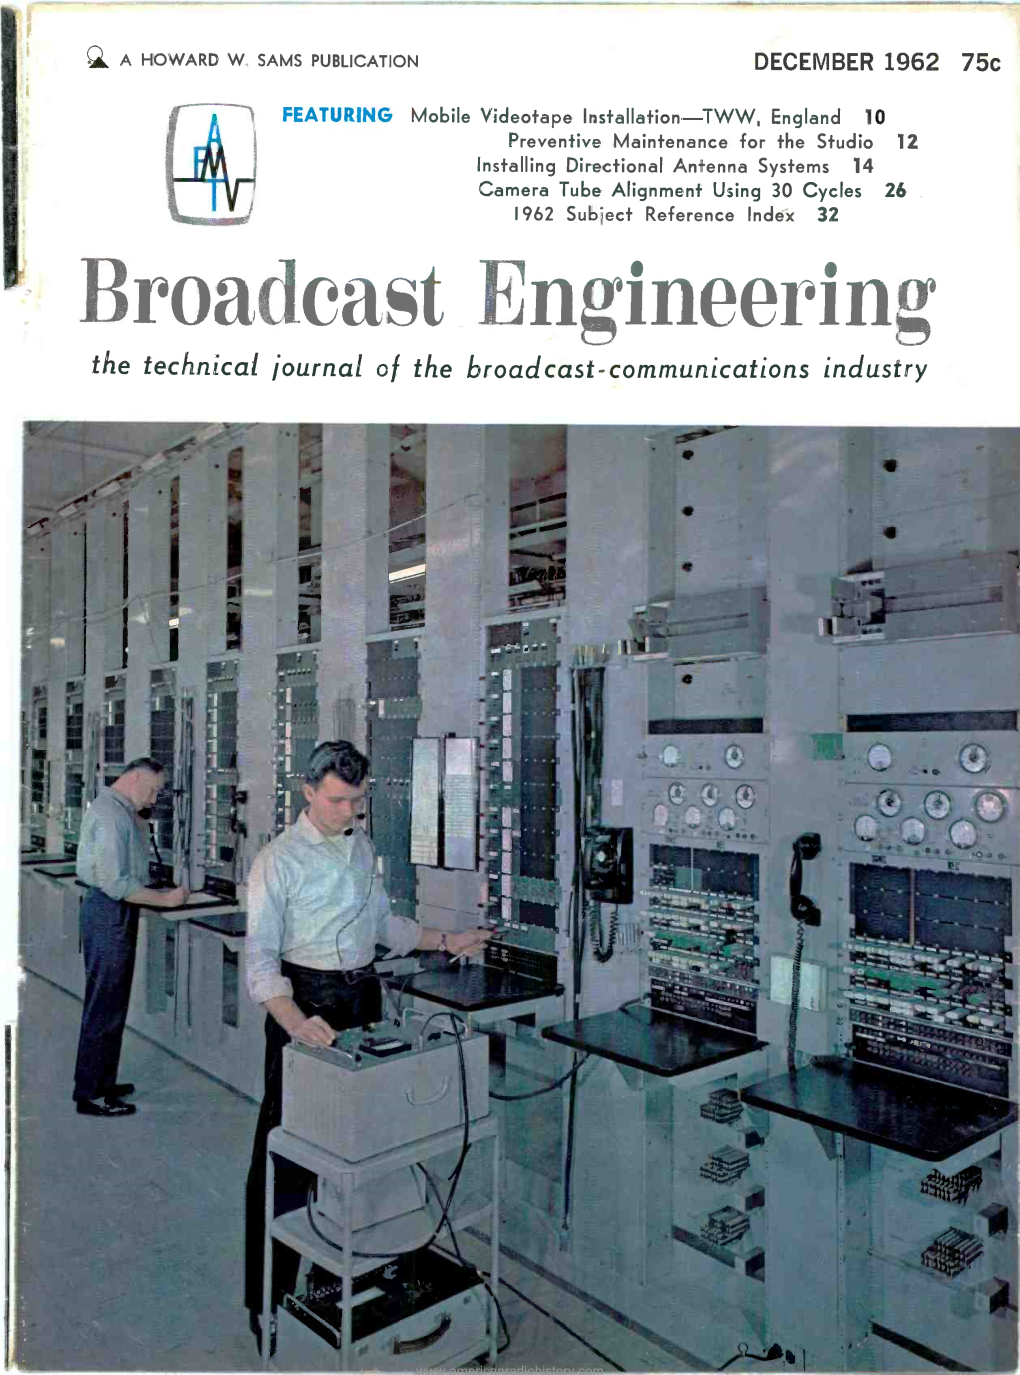 Broadcast Engineering the Technical Journal of the Broadcast -Communications Industry